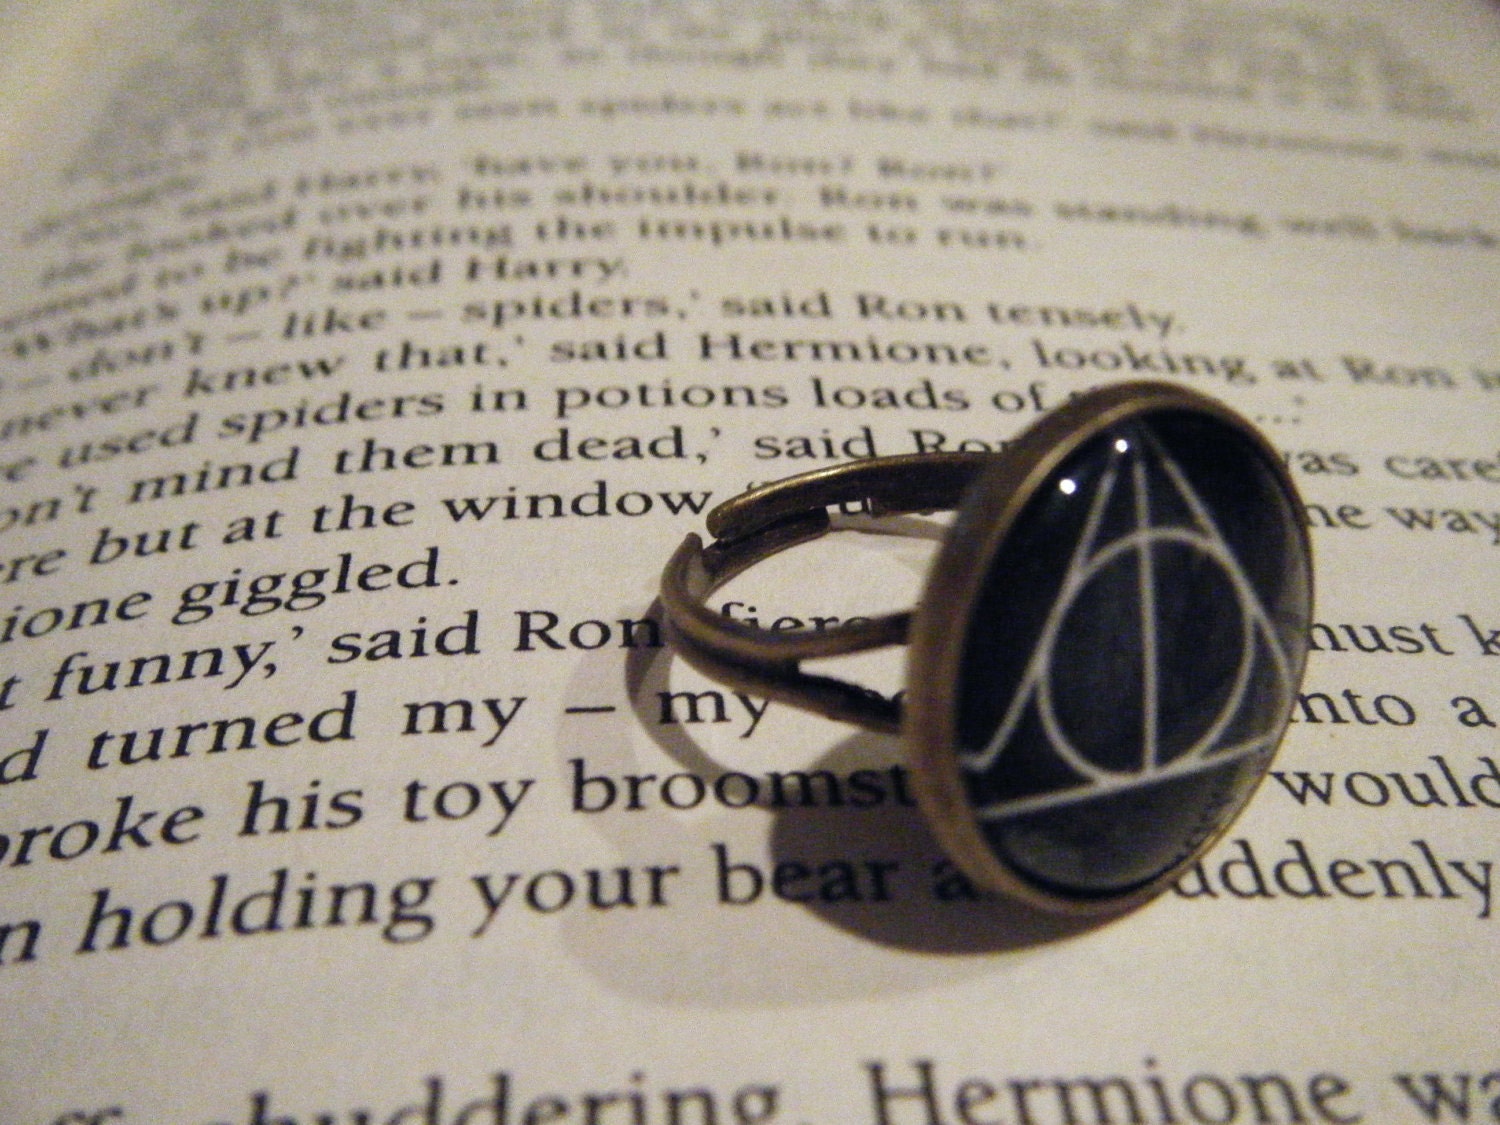 Deathly Hallows Ring